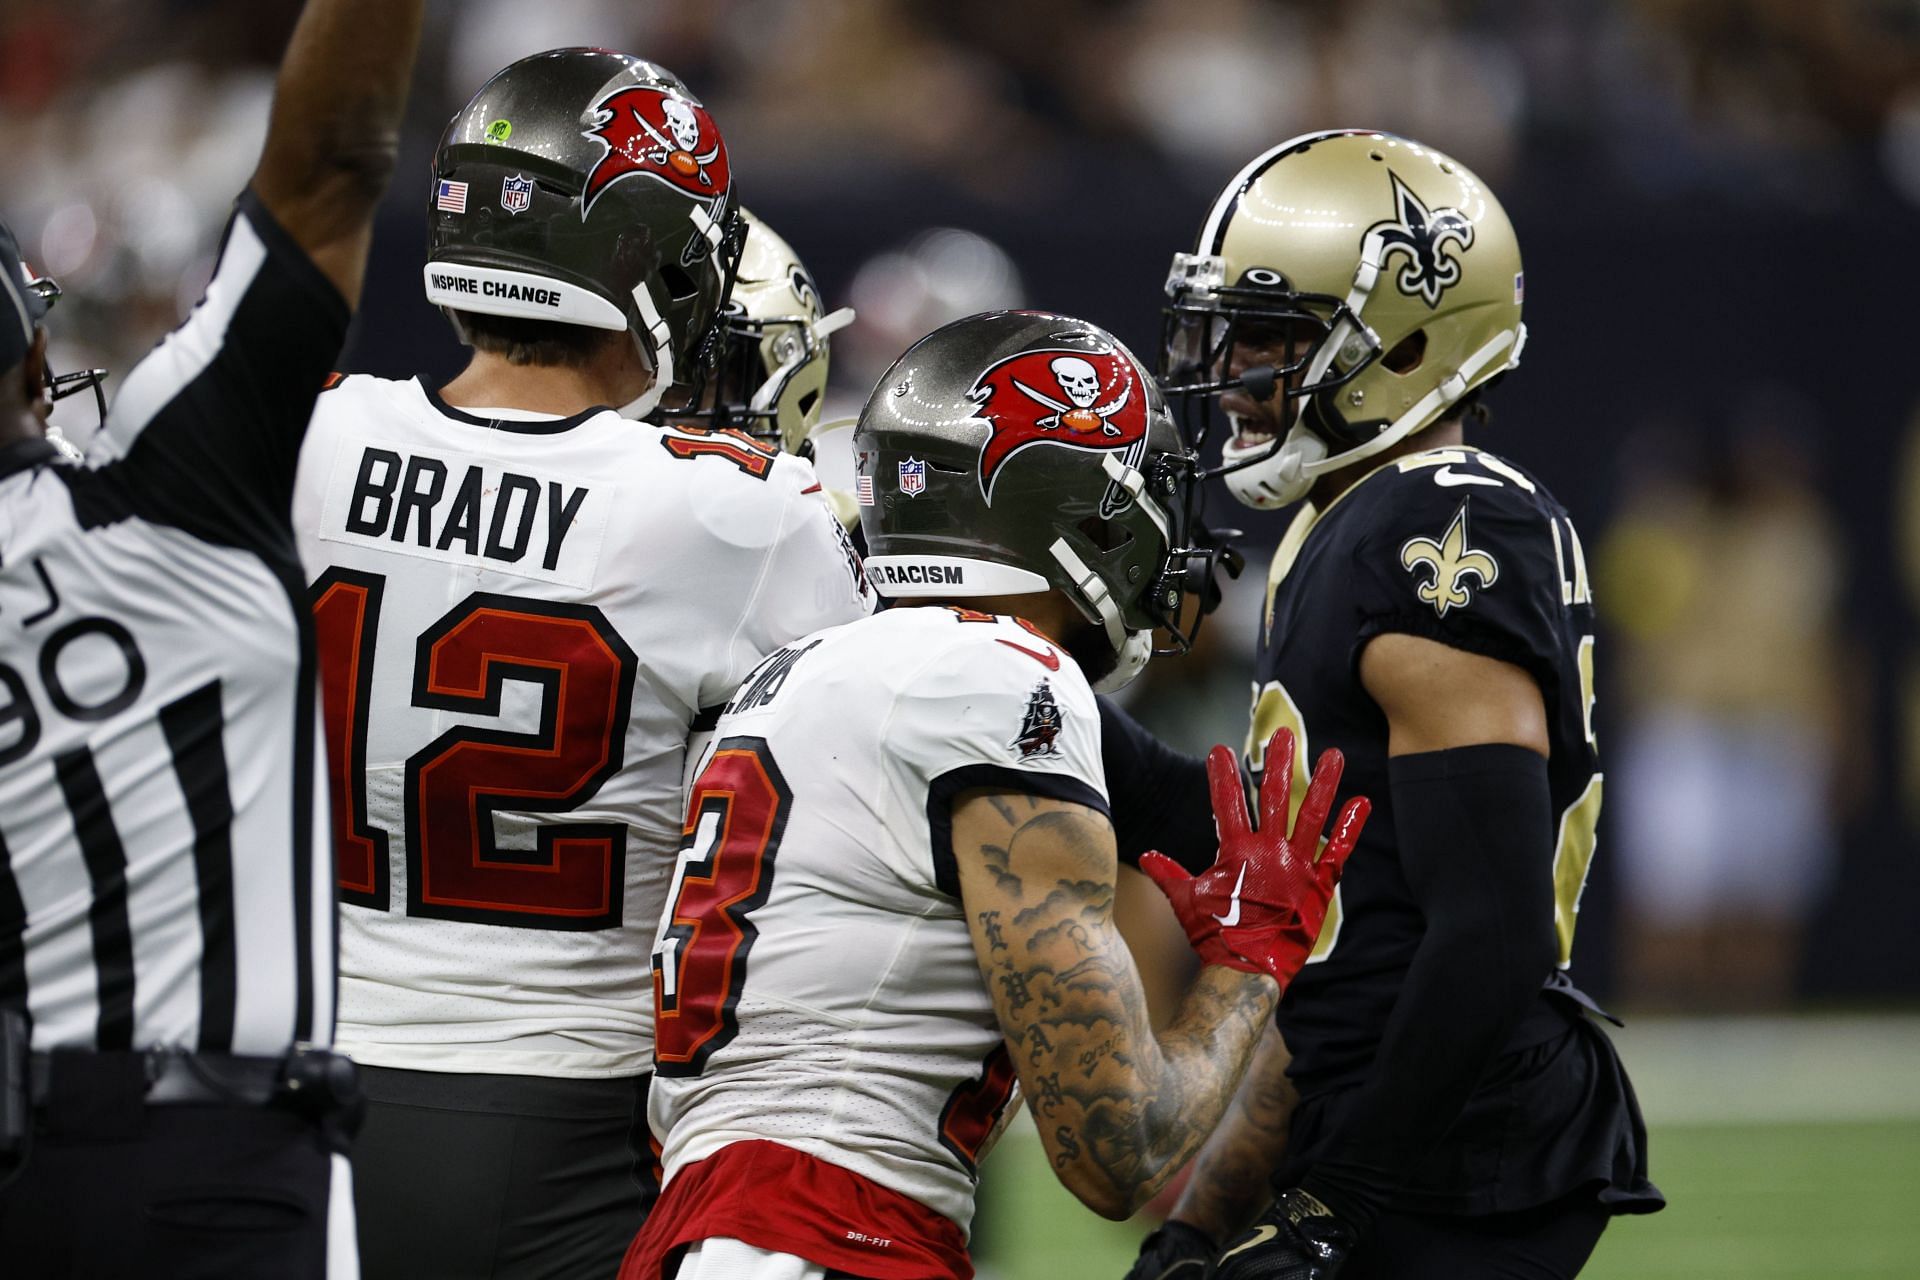 Why Tampa Bay Buccaneers wide receiver Mike Evans was suspended for fight  with Marshon Lattimore